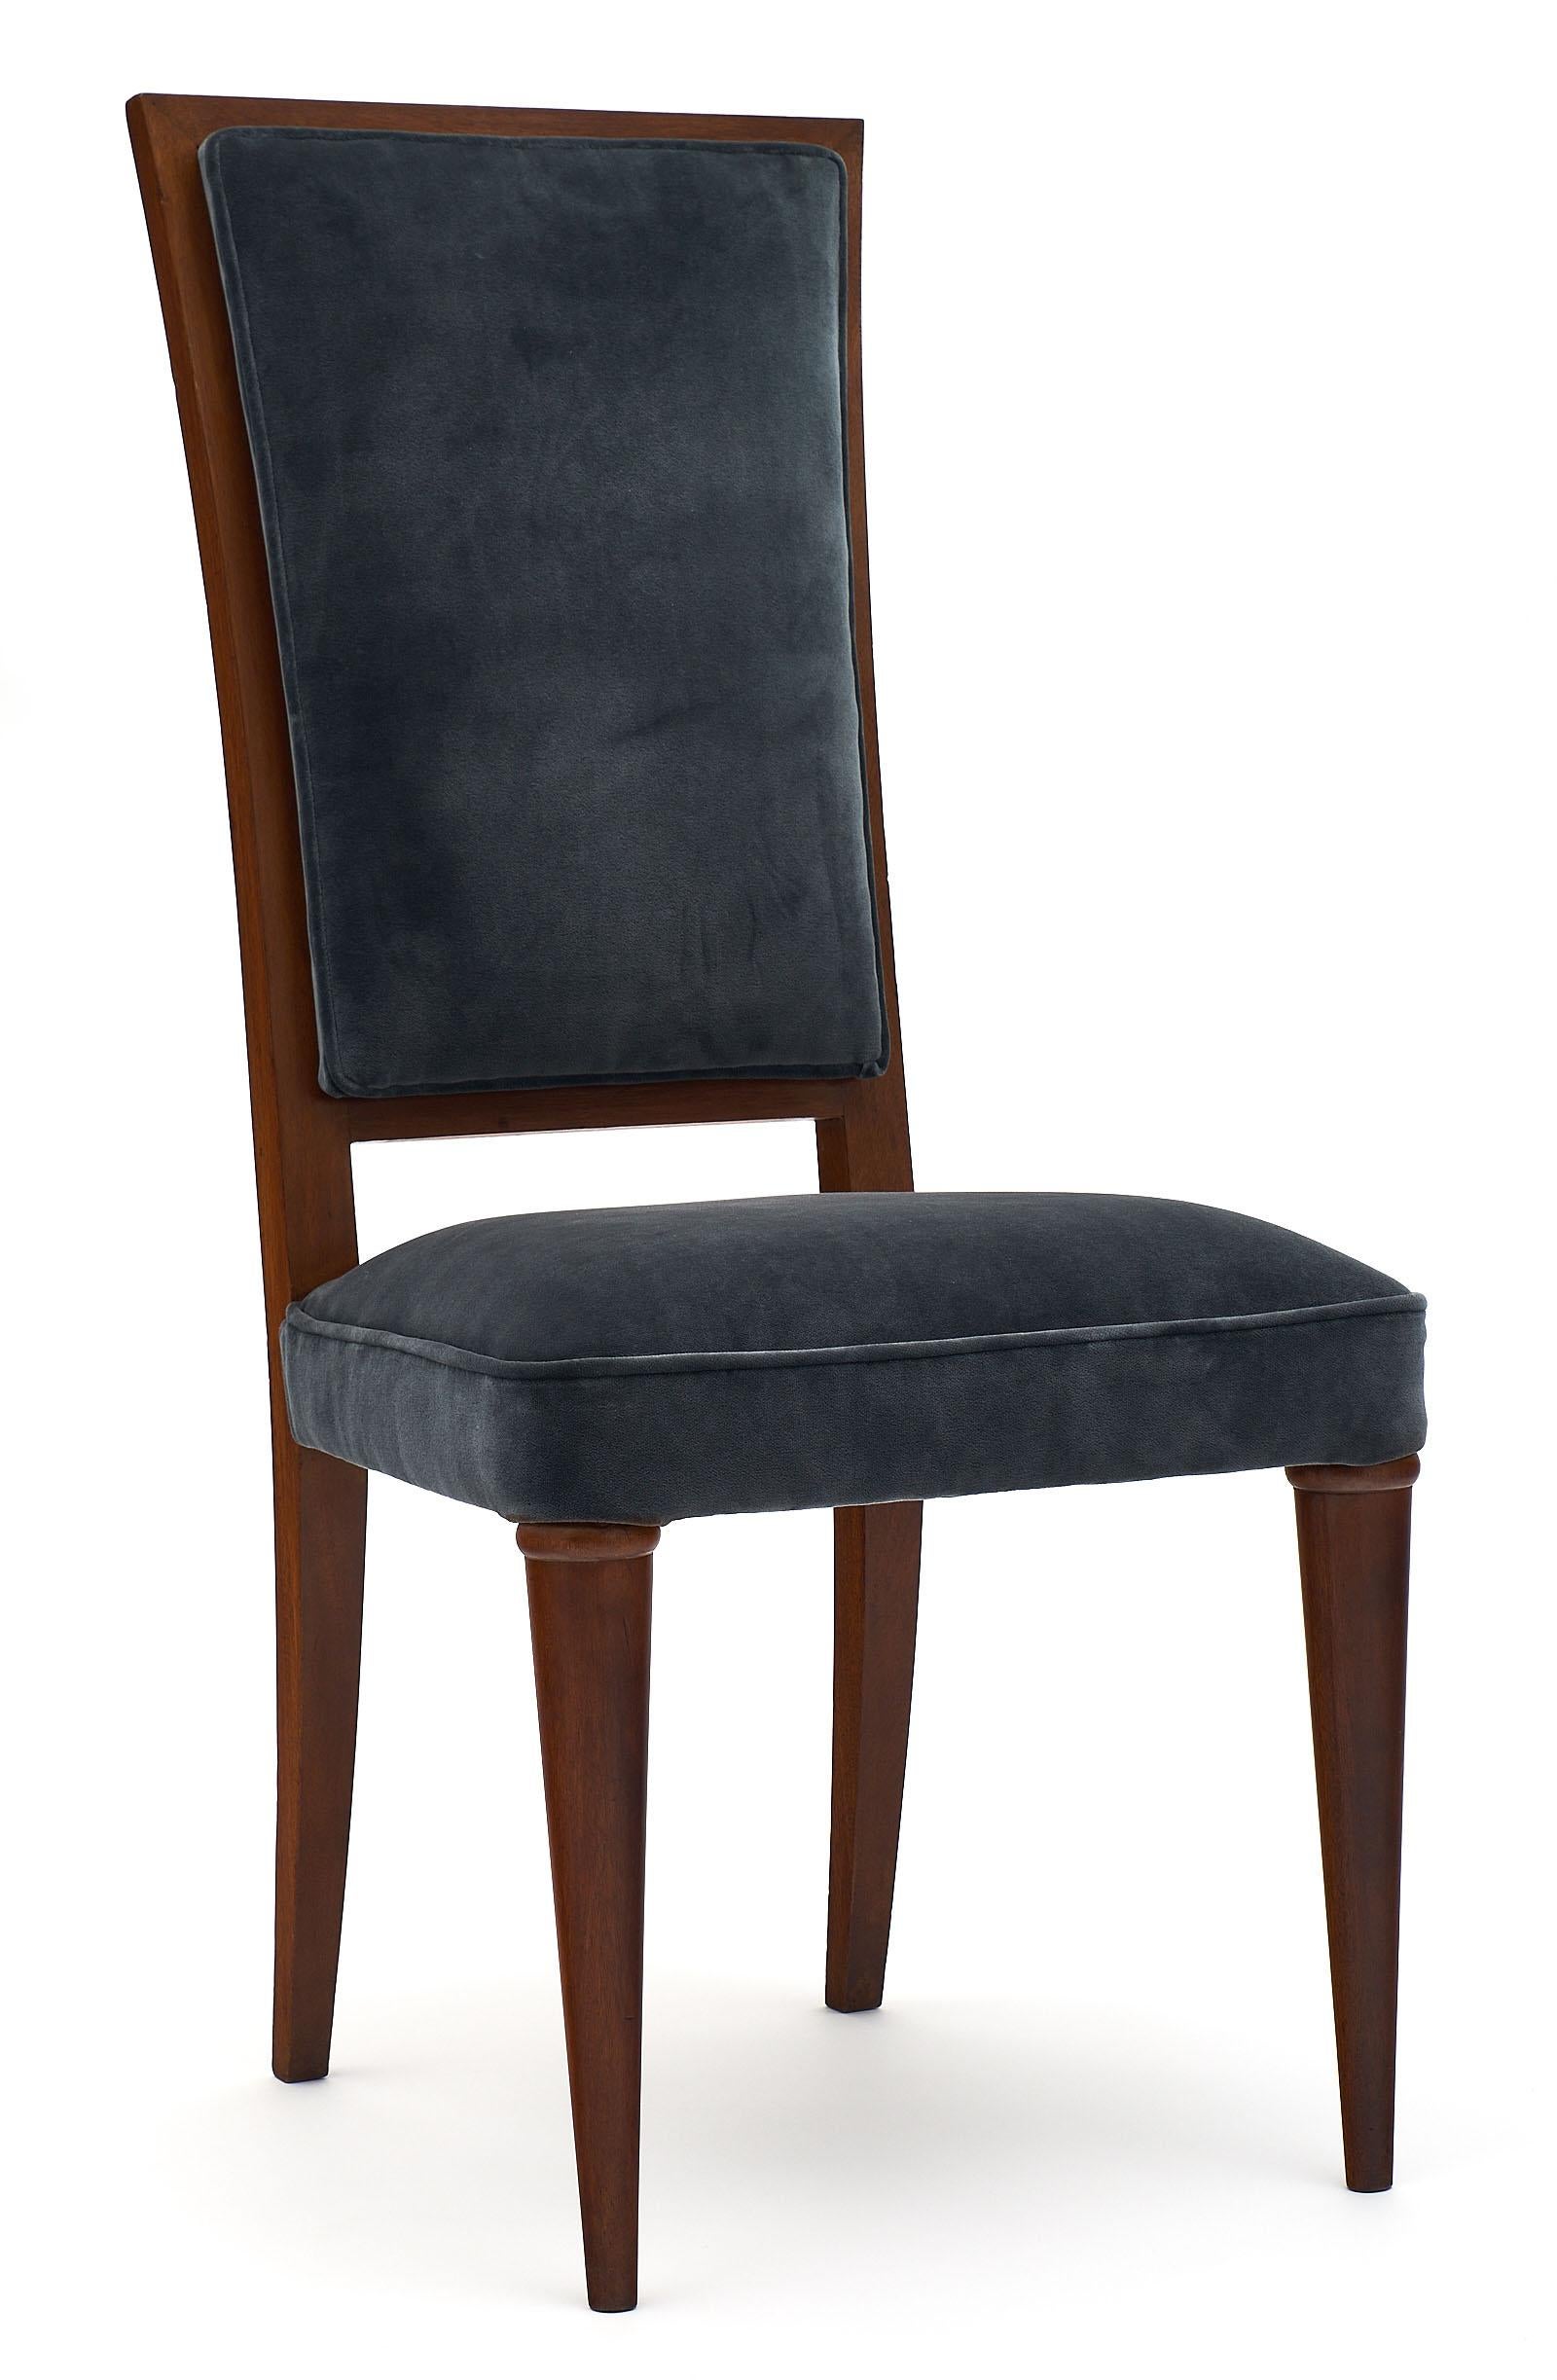 French Art Deco period mahogany chairs with very strong, comfortable frames. We love the high back and straight modernist lines. They have been newly upholstered in a dark gray cotton velvet blend.